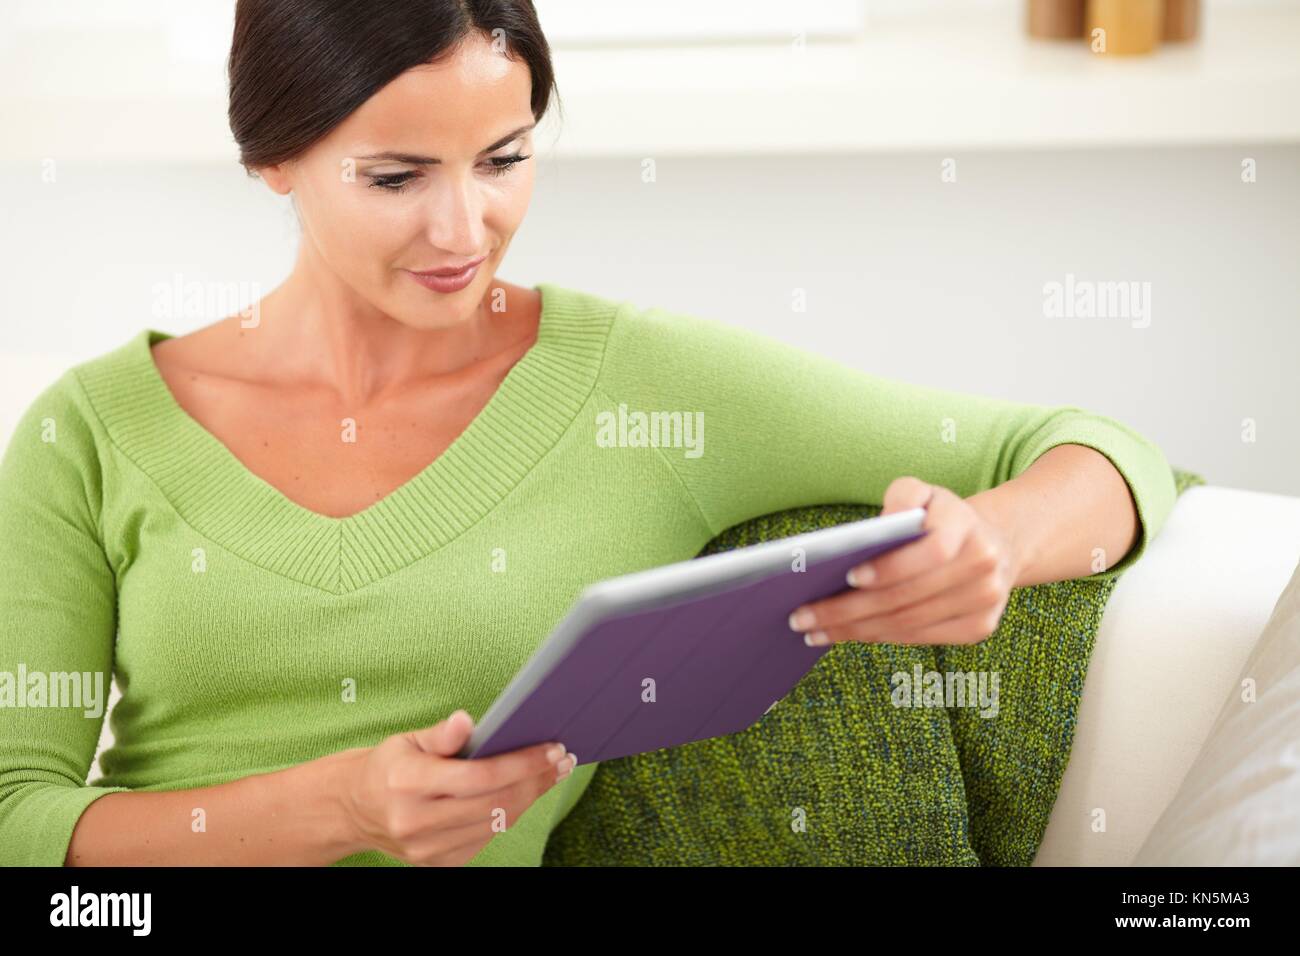 Waist up portrait of a caucasian woman in a green tank top using a tablet indoors. Stock Photo